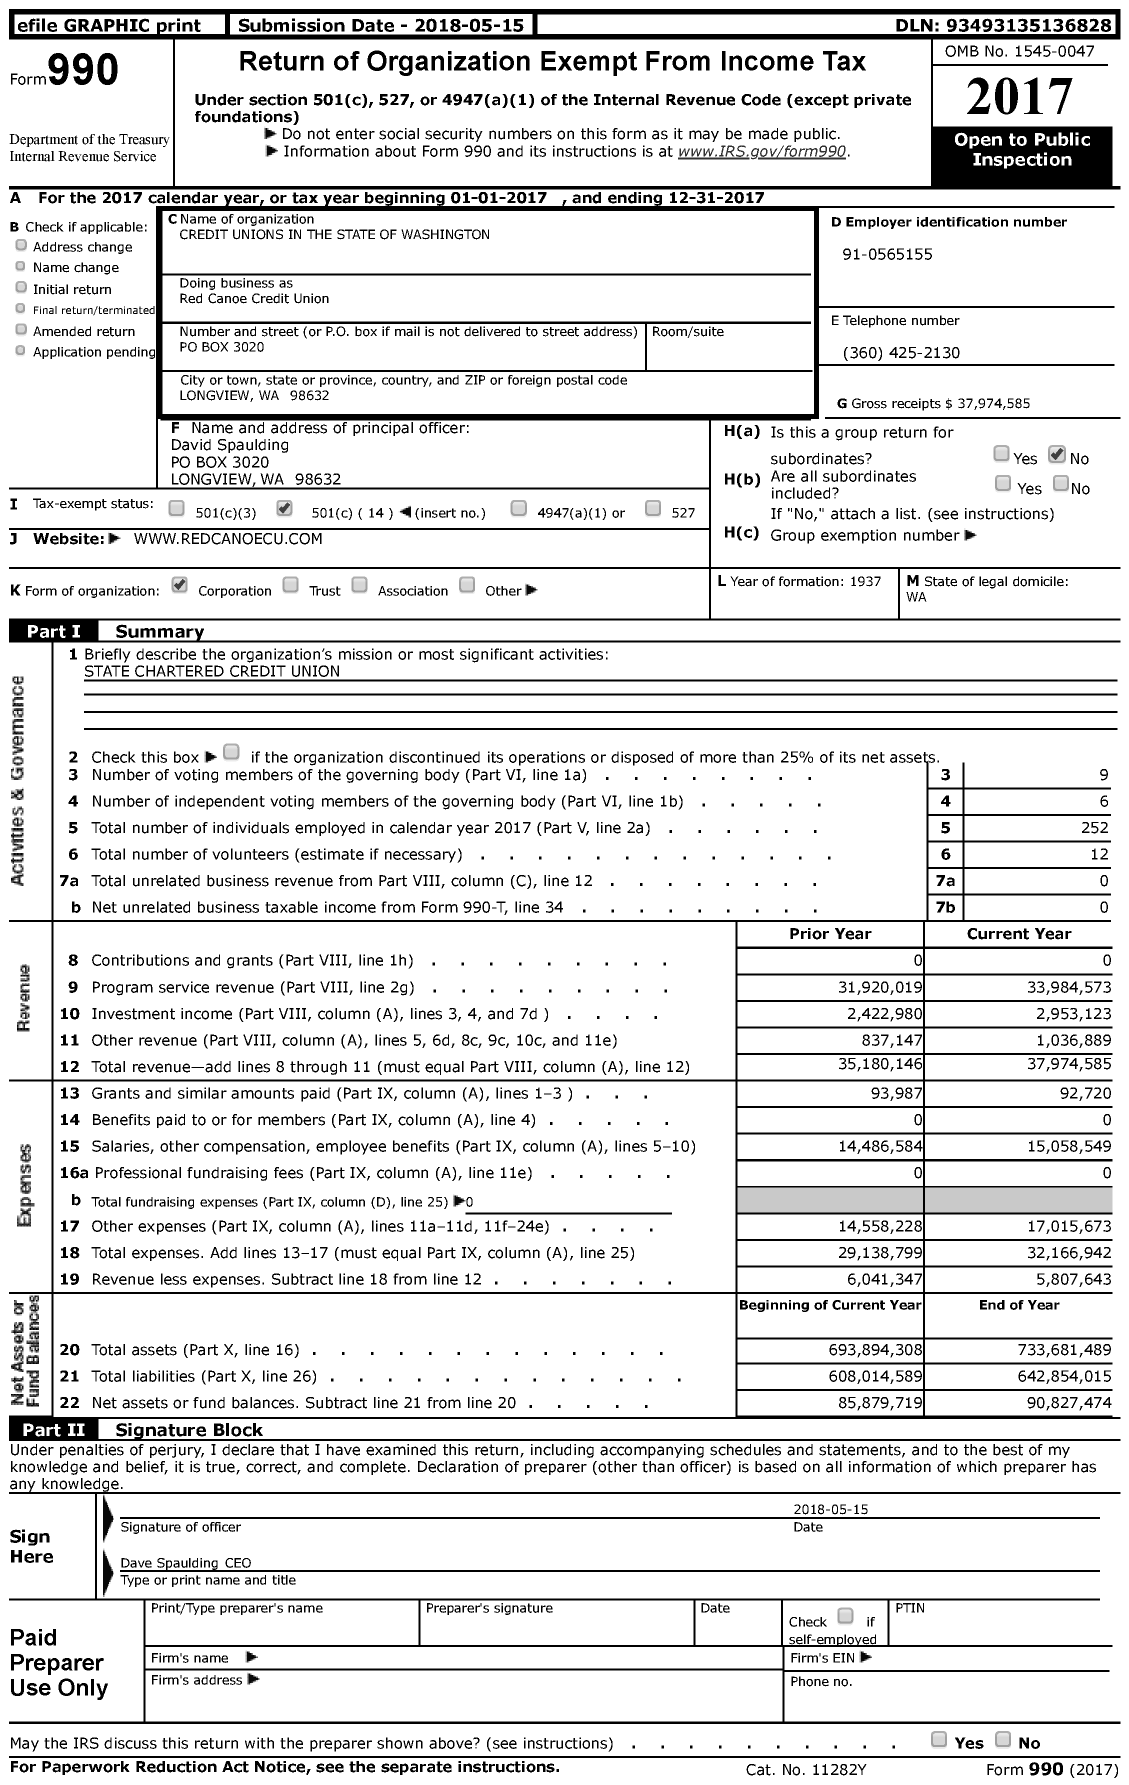 Image of first page of 2017 Form 990 for Red Canoe Credit Union / Credit Unions in the State of Washington